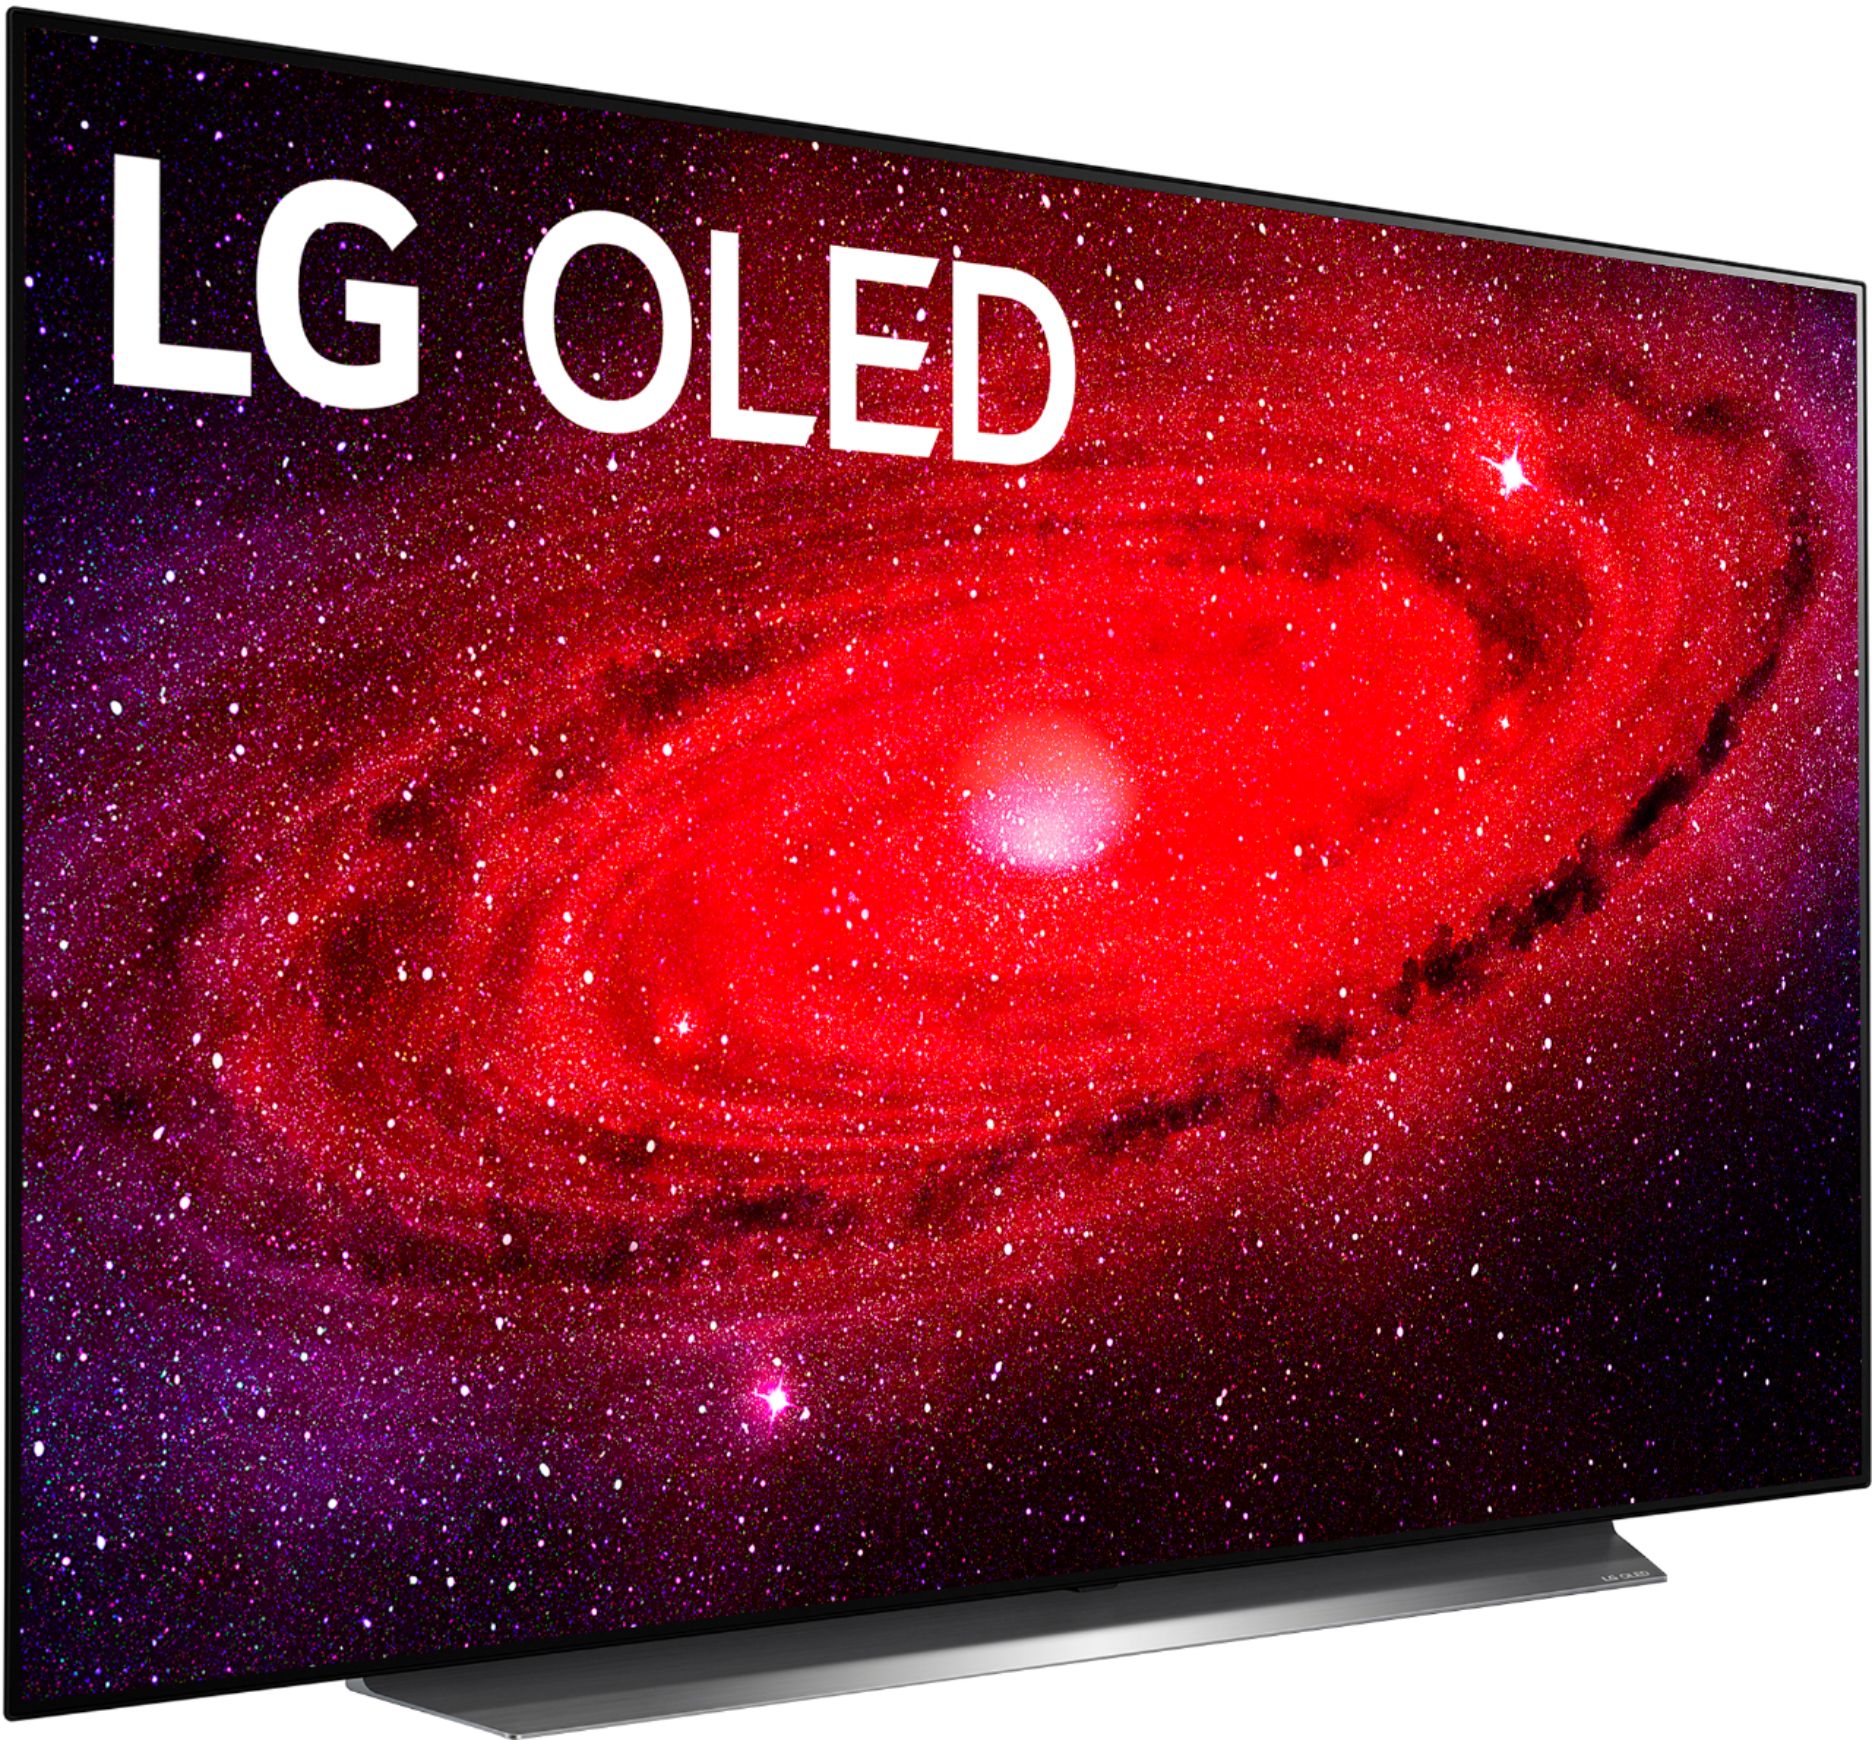 LG CX OLED vs. TCL 6-Series Roku TV (R635) faceoff | Tom's Guide - Does Tom Nook Have Black Friday Deals